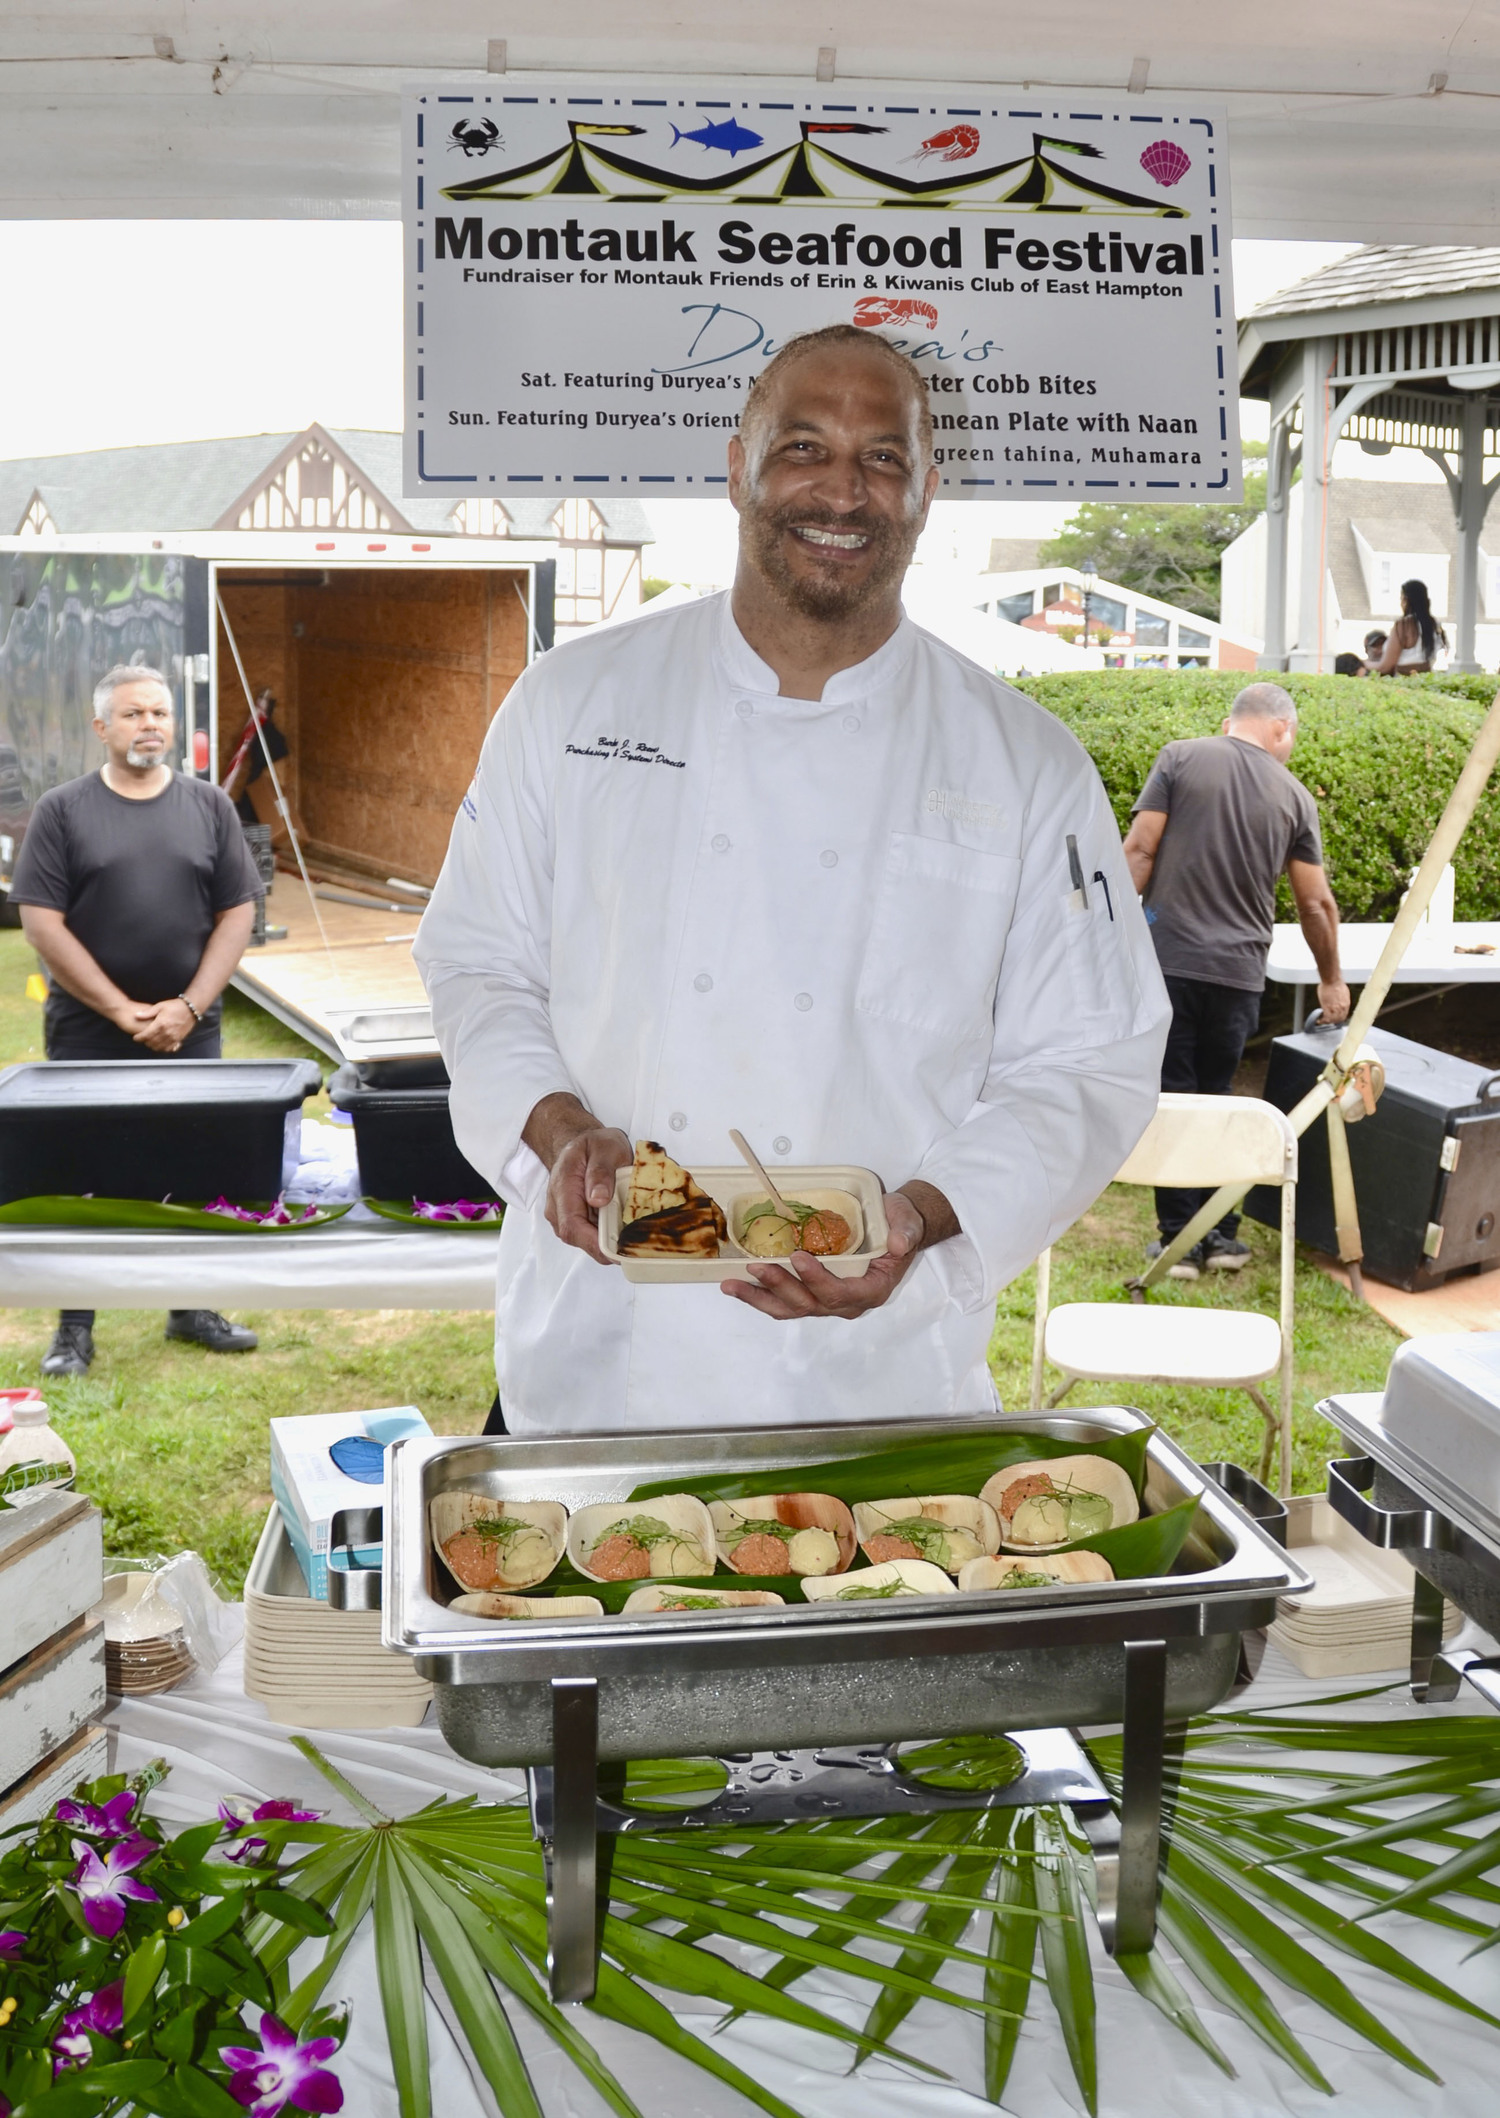 Burke Reeves. of Duryea’s at the Montauk Seafood Festival on Sunday to Benefit the Montauk Friends of Erin and the Kiwanis Club of East Hampton .  KYRIL BROMLEY